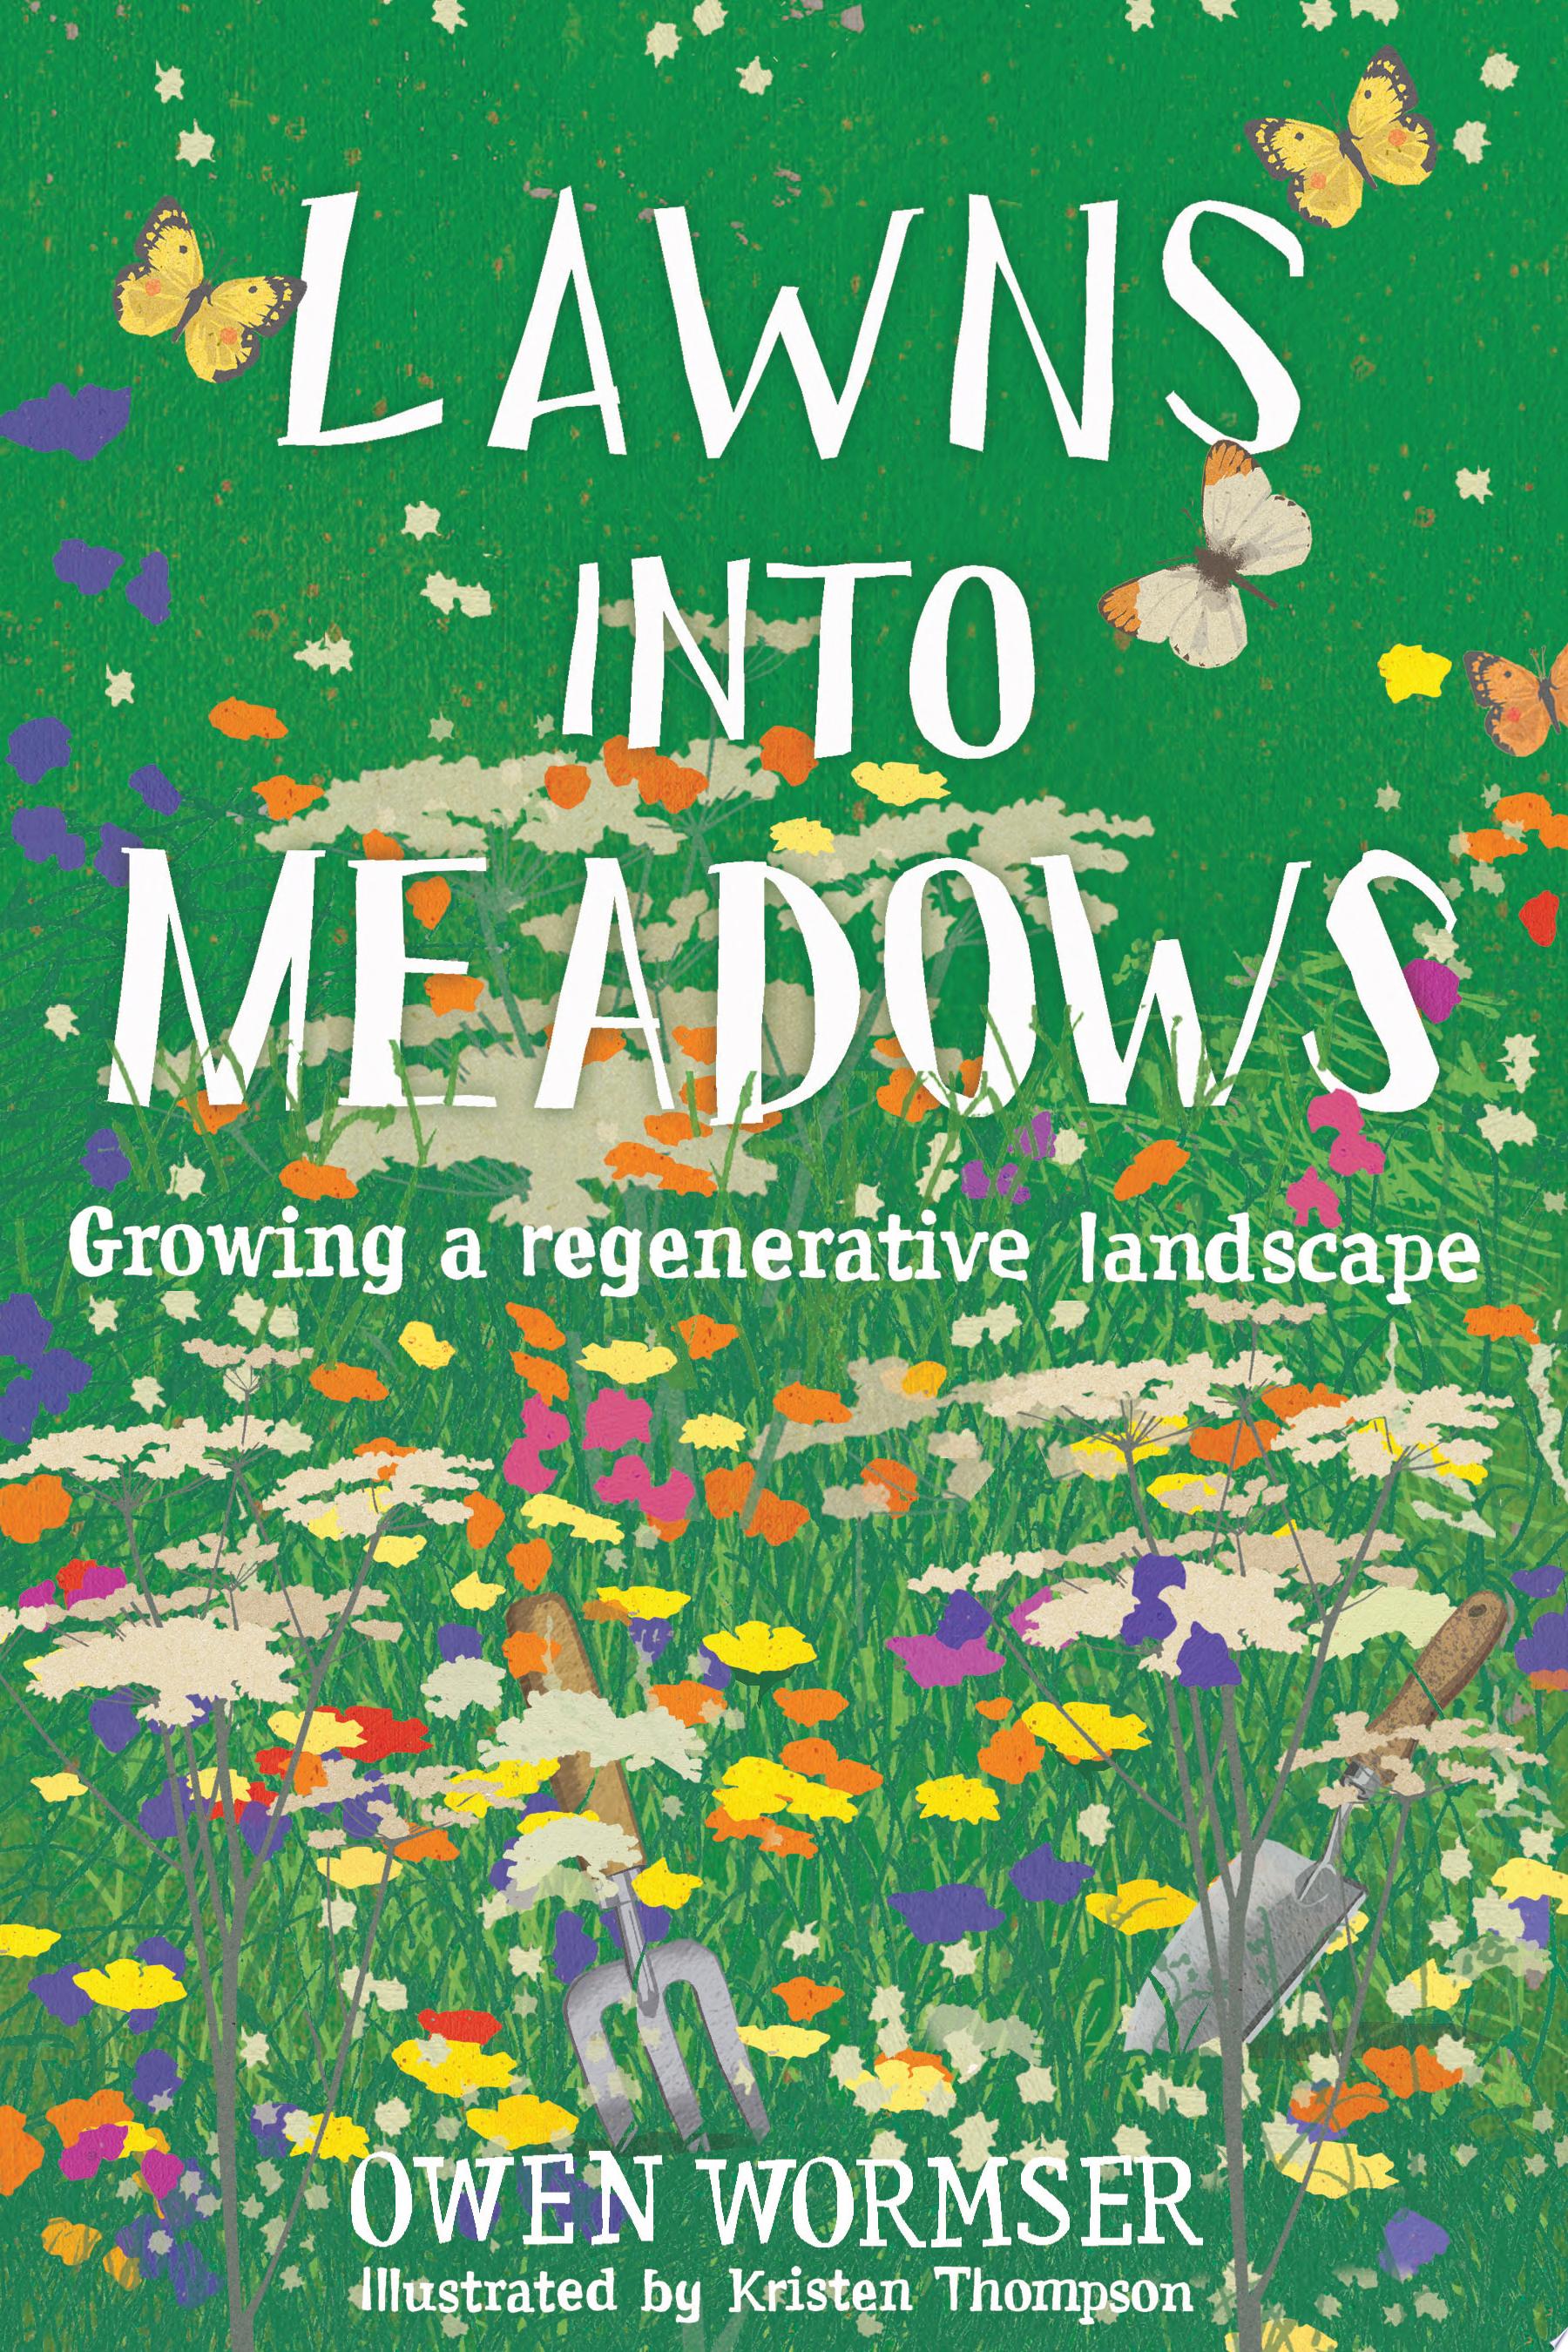 Image for "Lawns into Meadows"